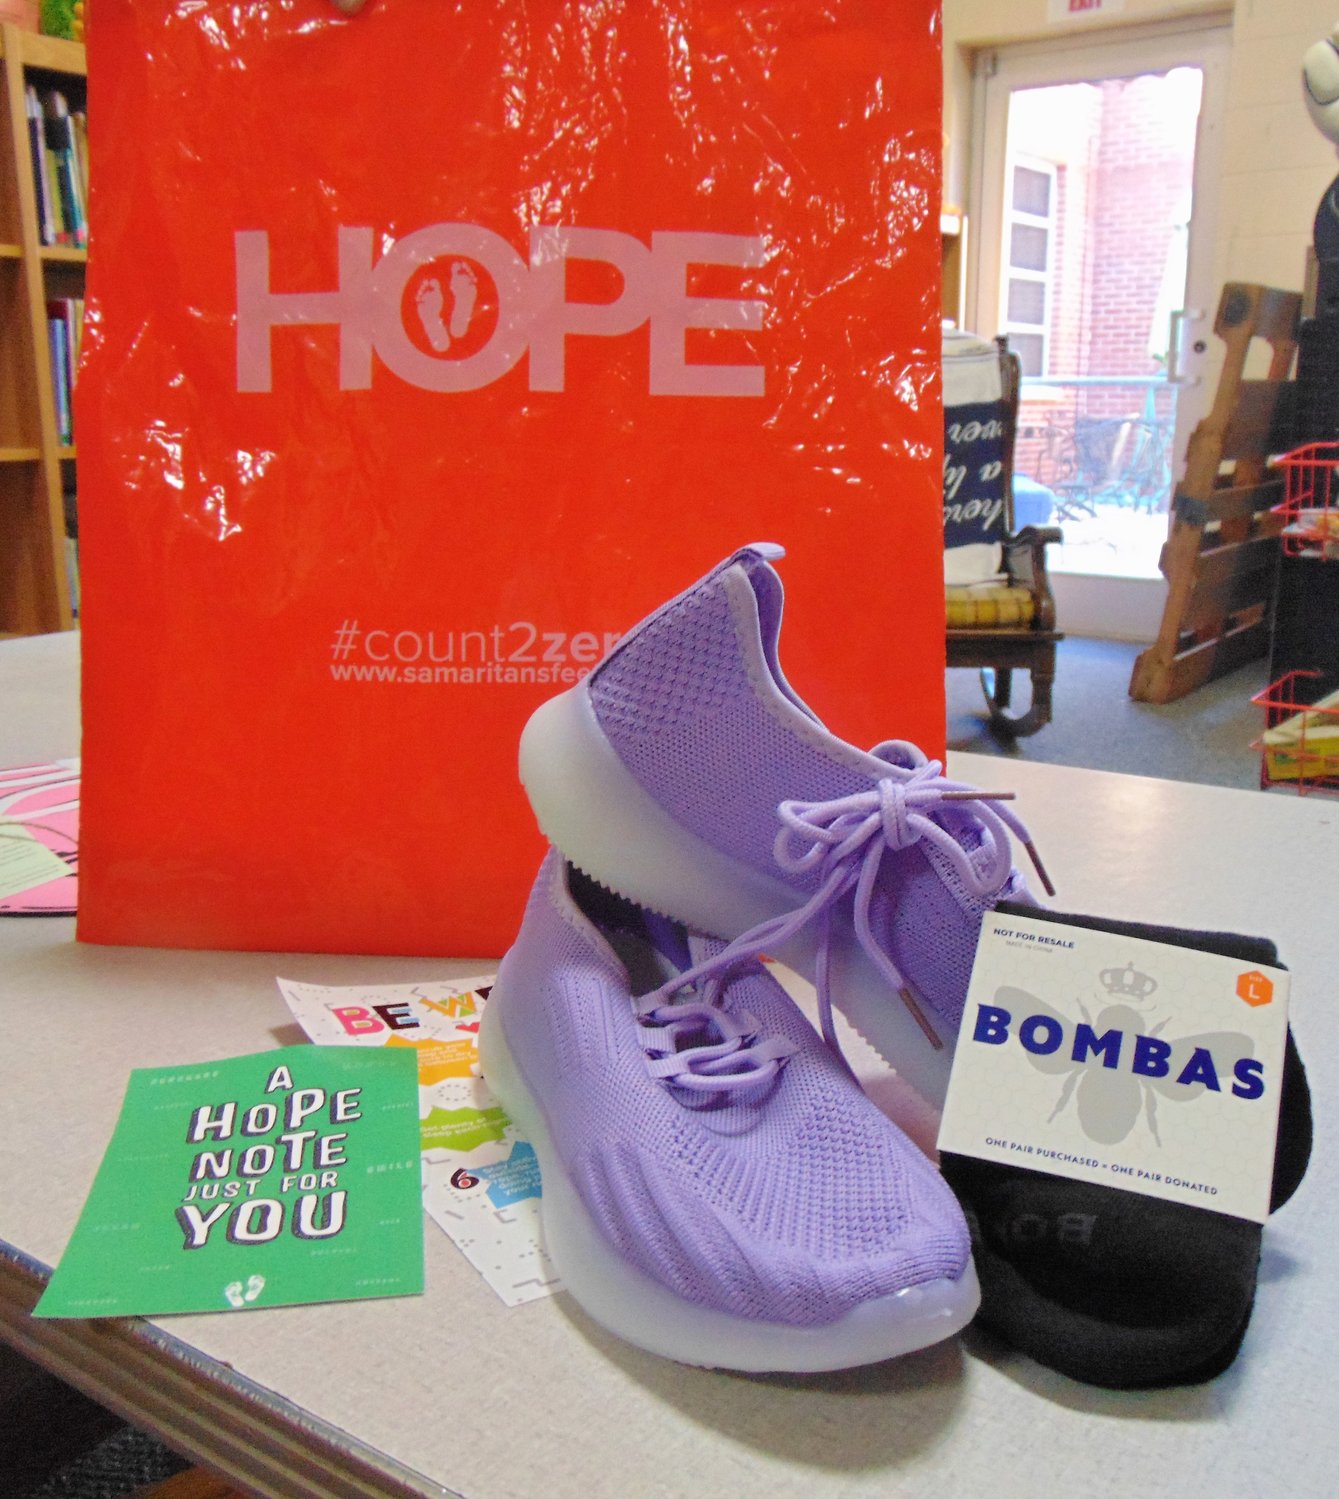 Students at Southside will get a free pair of unbranded shoes and a pair of new socks.